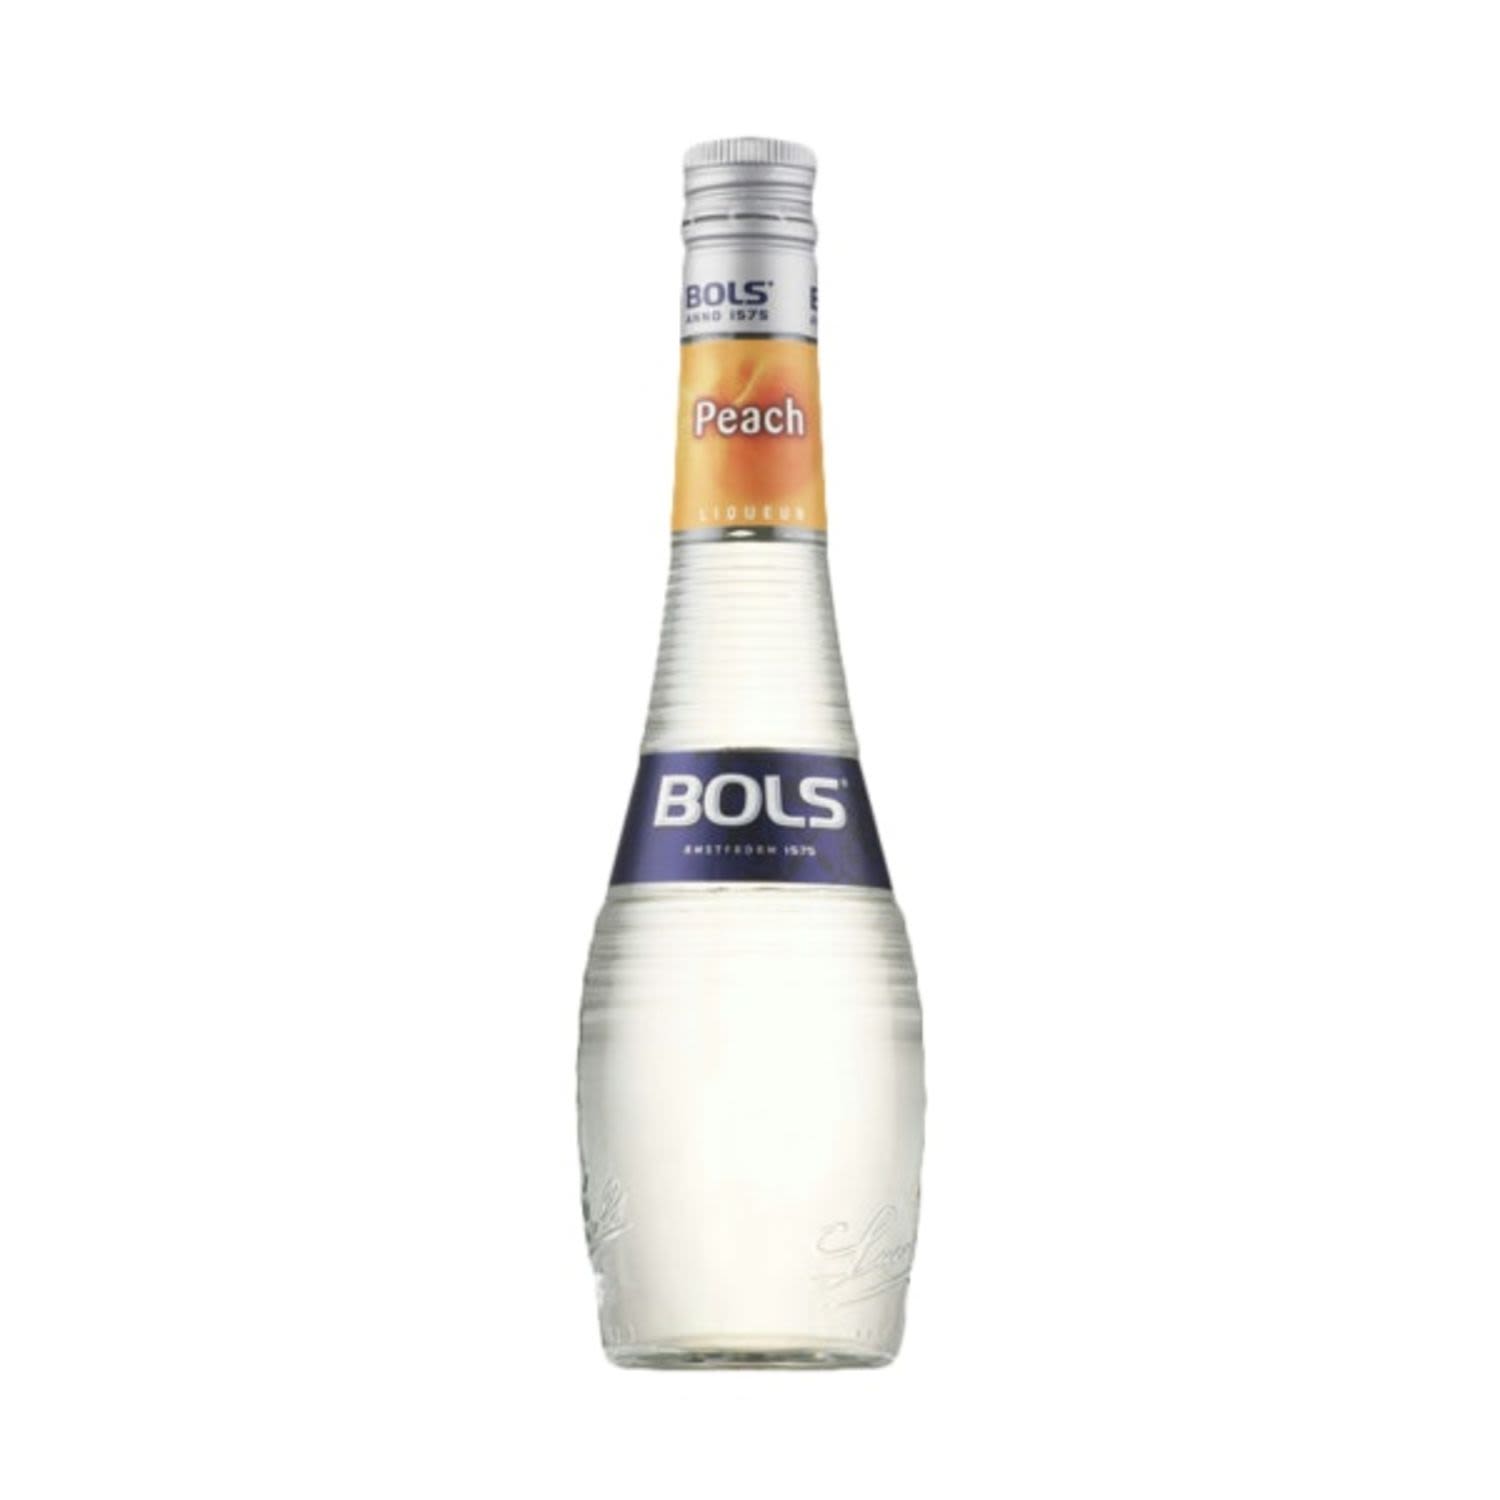 Bols Peach, is a liqueur flavour that came to prominence in the USA in the late 1970s and in the UK and Europe in the mid-1980s. Bole Peach is just about the only ingredient that is indispensable in the wildly popular Sex on the Beach cocktail and the Bellini. It also forms the basis of simple long drink-style cocktails such as the Woo . Bols Peach has a fresh peach flavour with hints of orange and citrus.<br /> <br />Alcohol Volume: 17.00%<br /><br />Pack Format: Bottle<br /><br />Standard Drinks: 6.7</br /><br />Pack Type: Bottle<br /><br />Country of Origin: Netherlands<br />